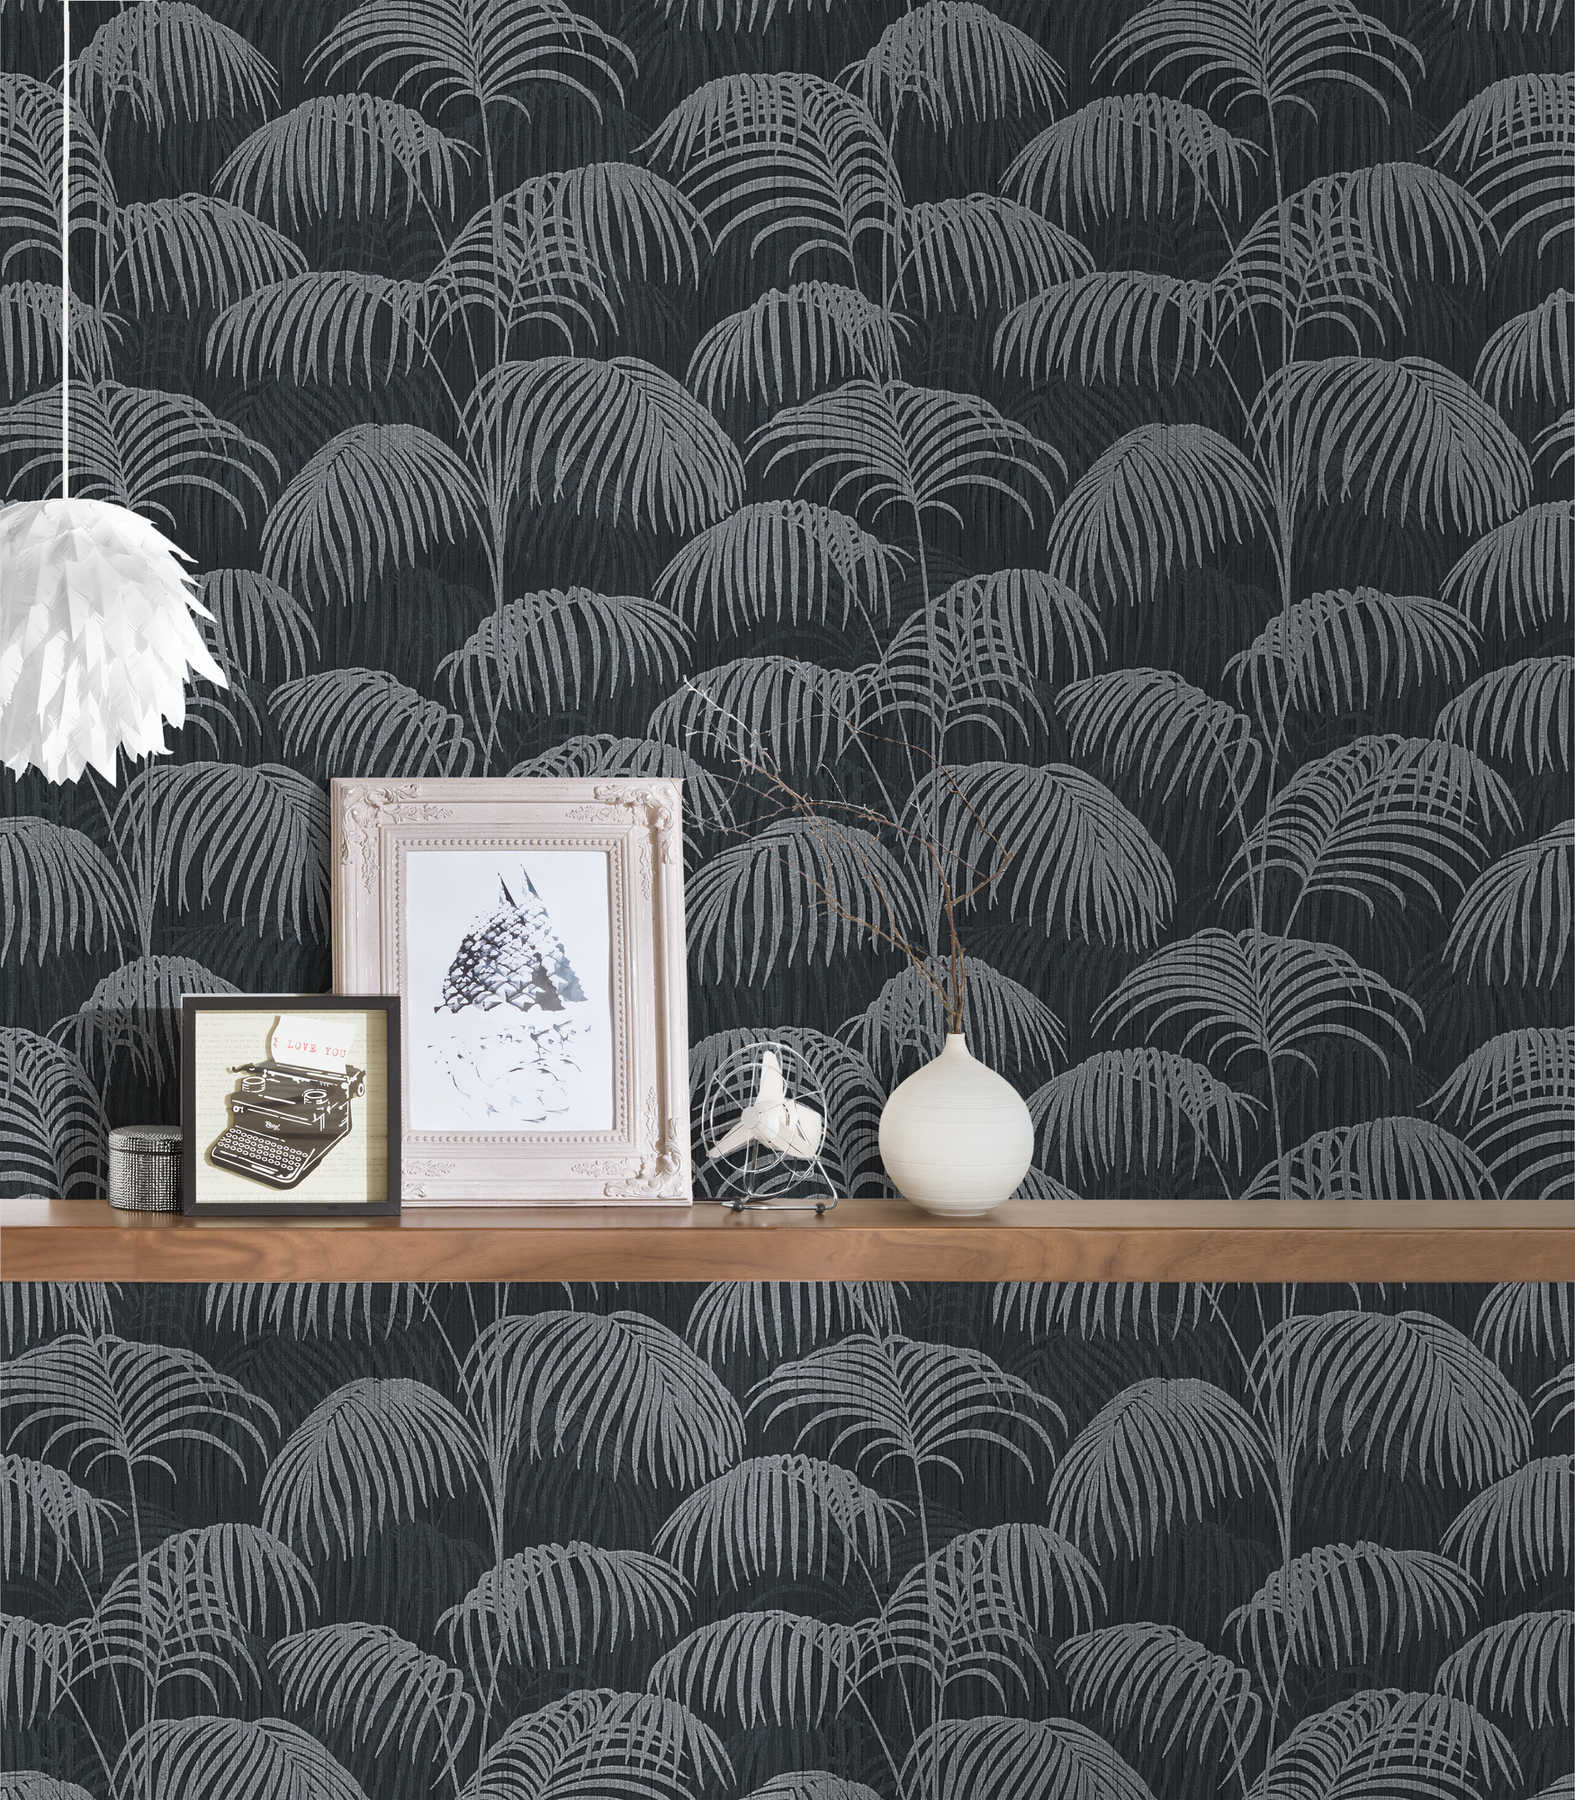             Wallpaper palm leaves nature pattern with depth effect - grey, black
        